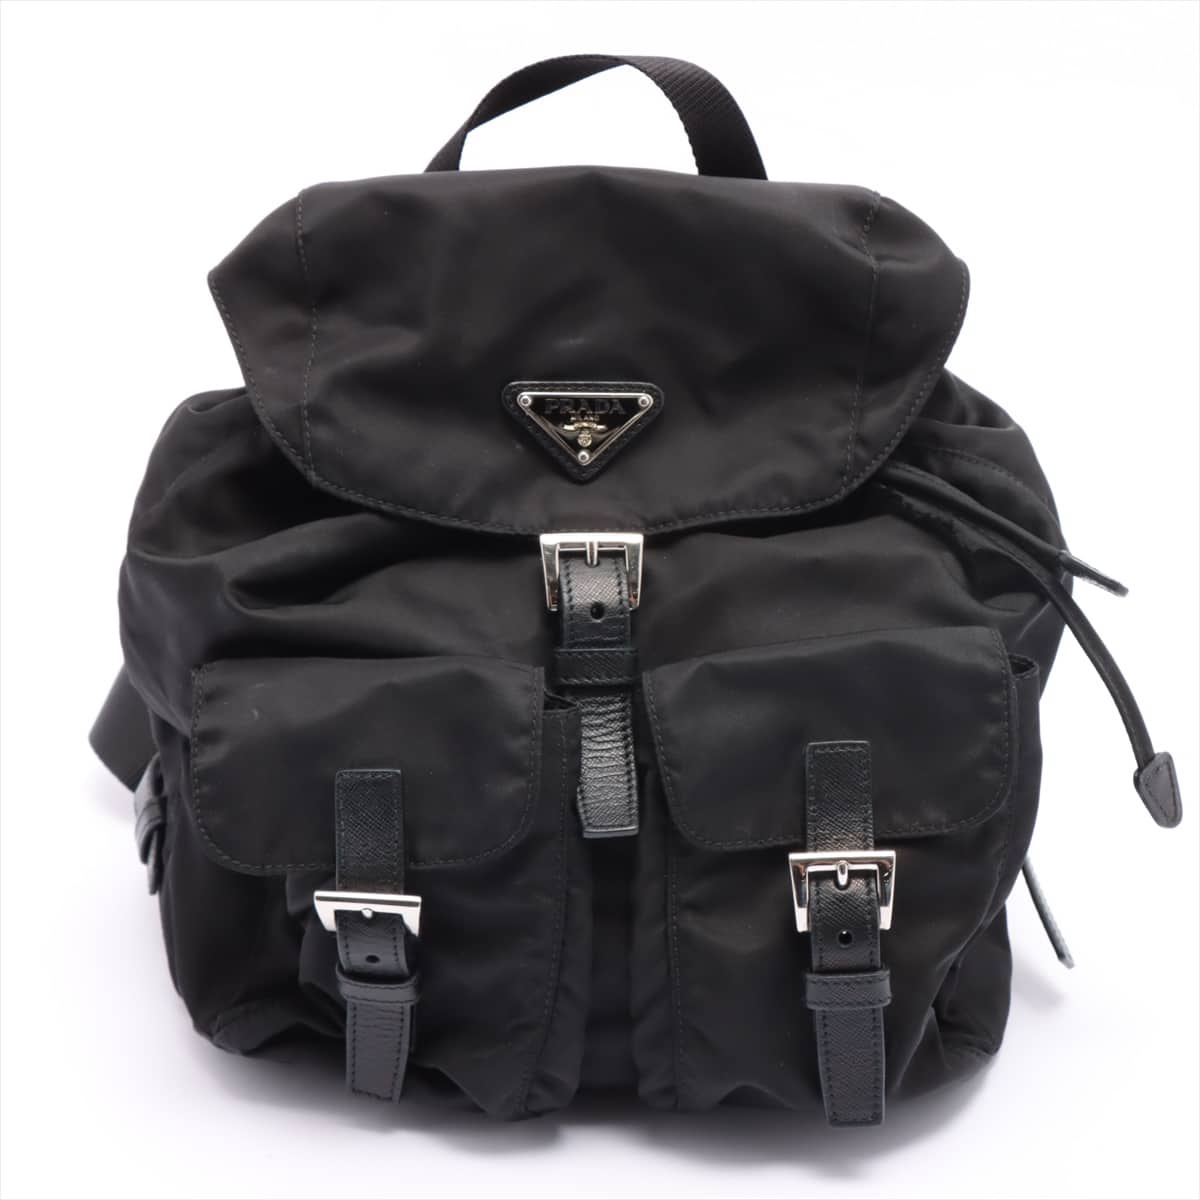 Prada Tessuto Backpack Black 1BZ677 open papers There is a tear in the upper string